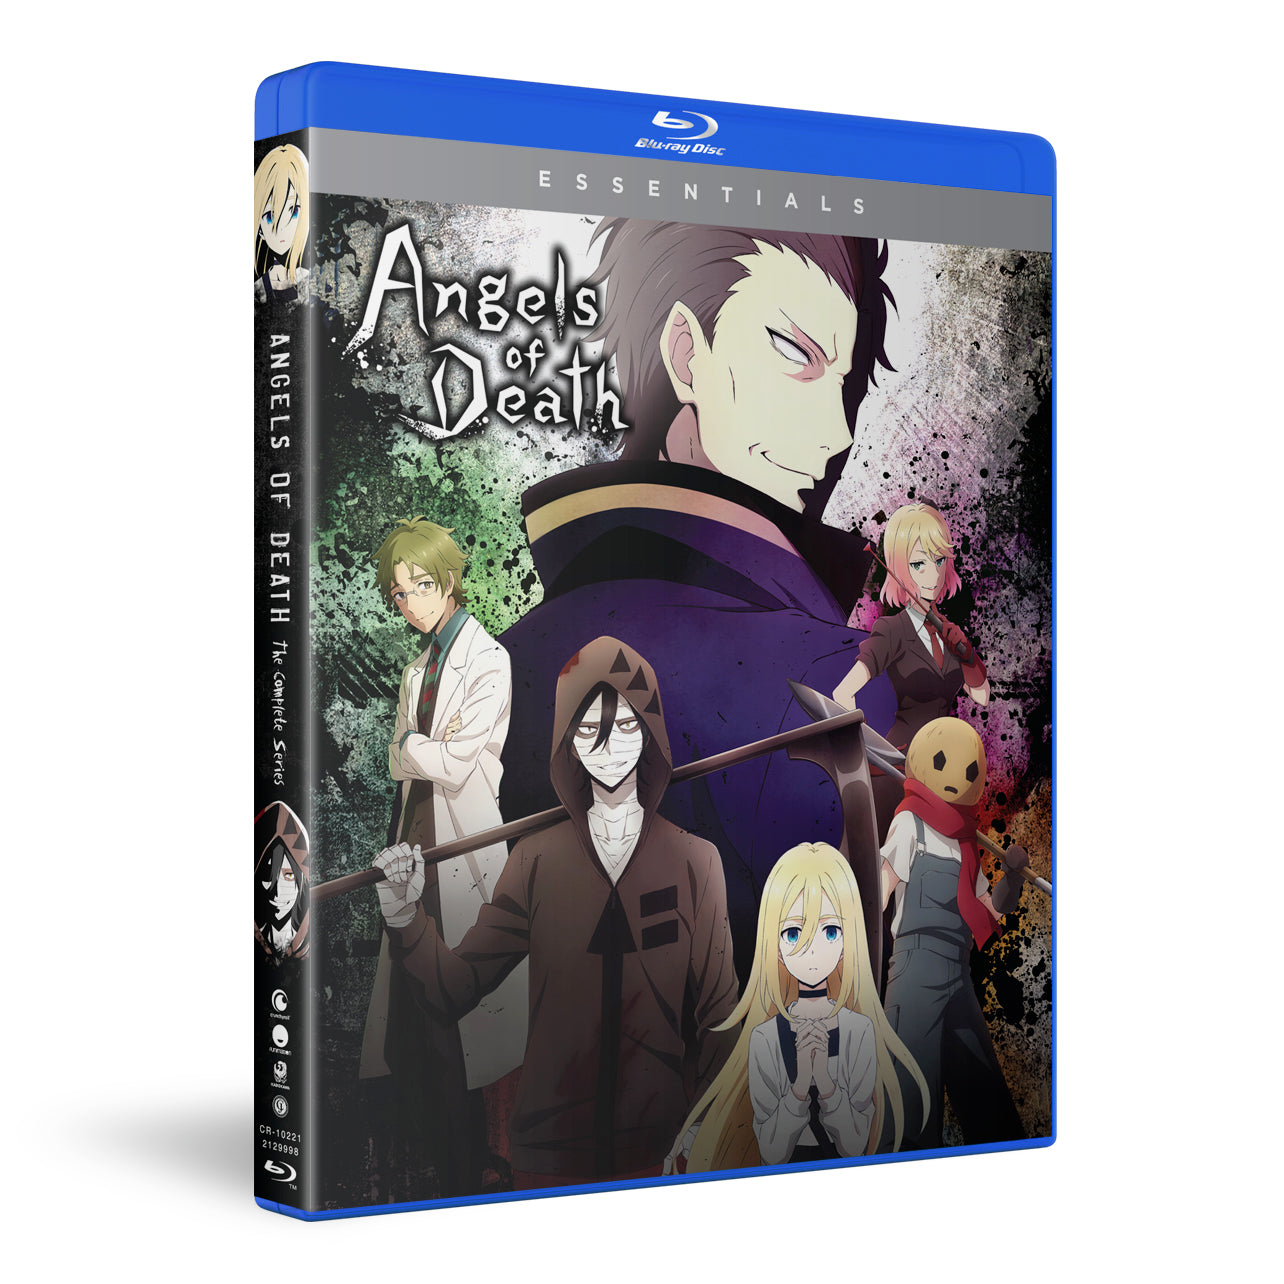 Angels of Death - The Complete Series - Essentials - Blu-ray ...